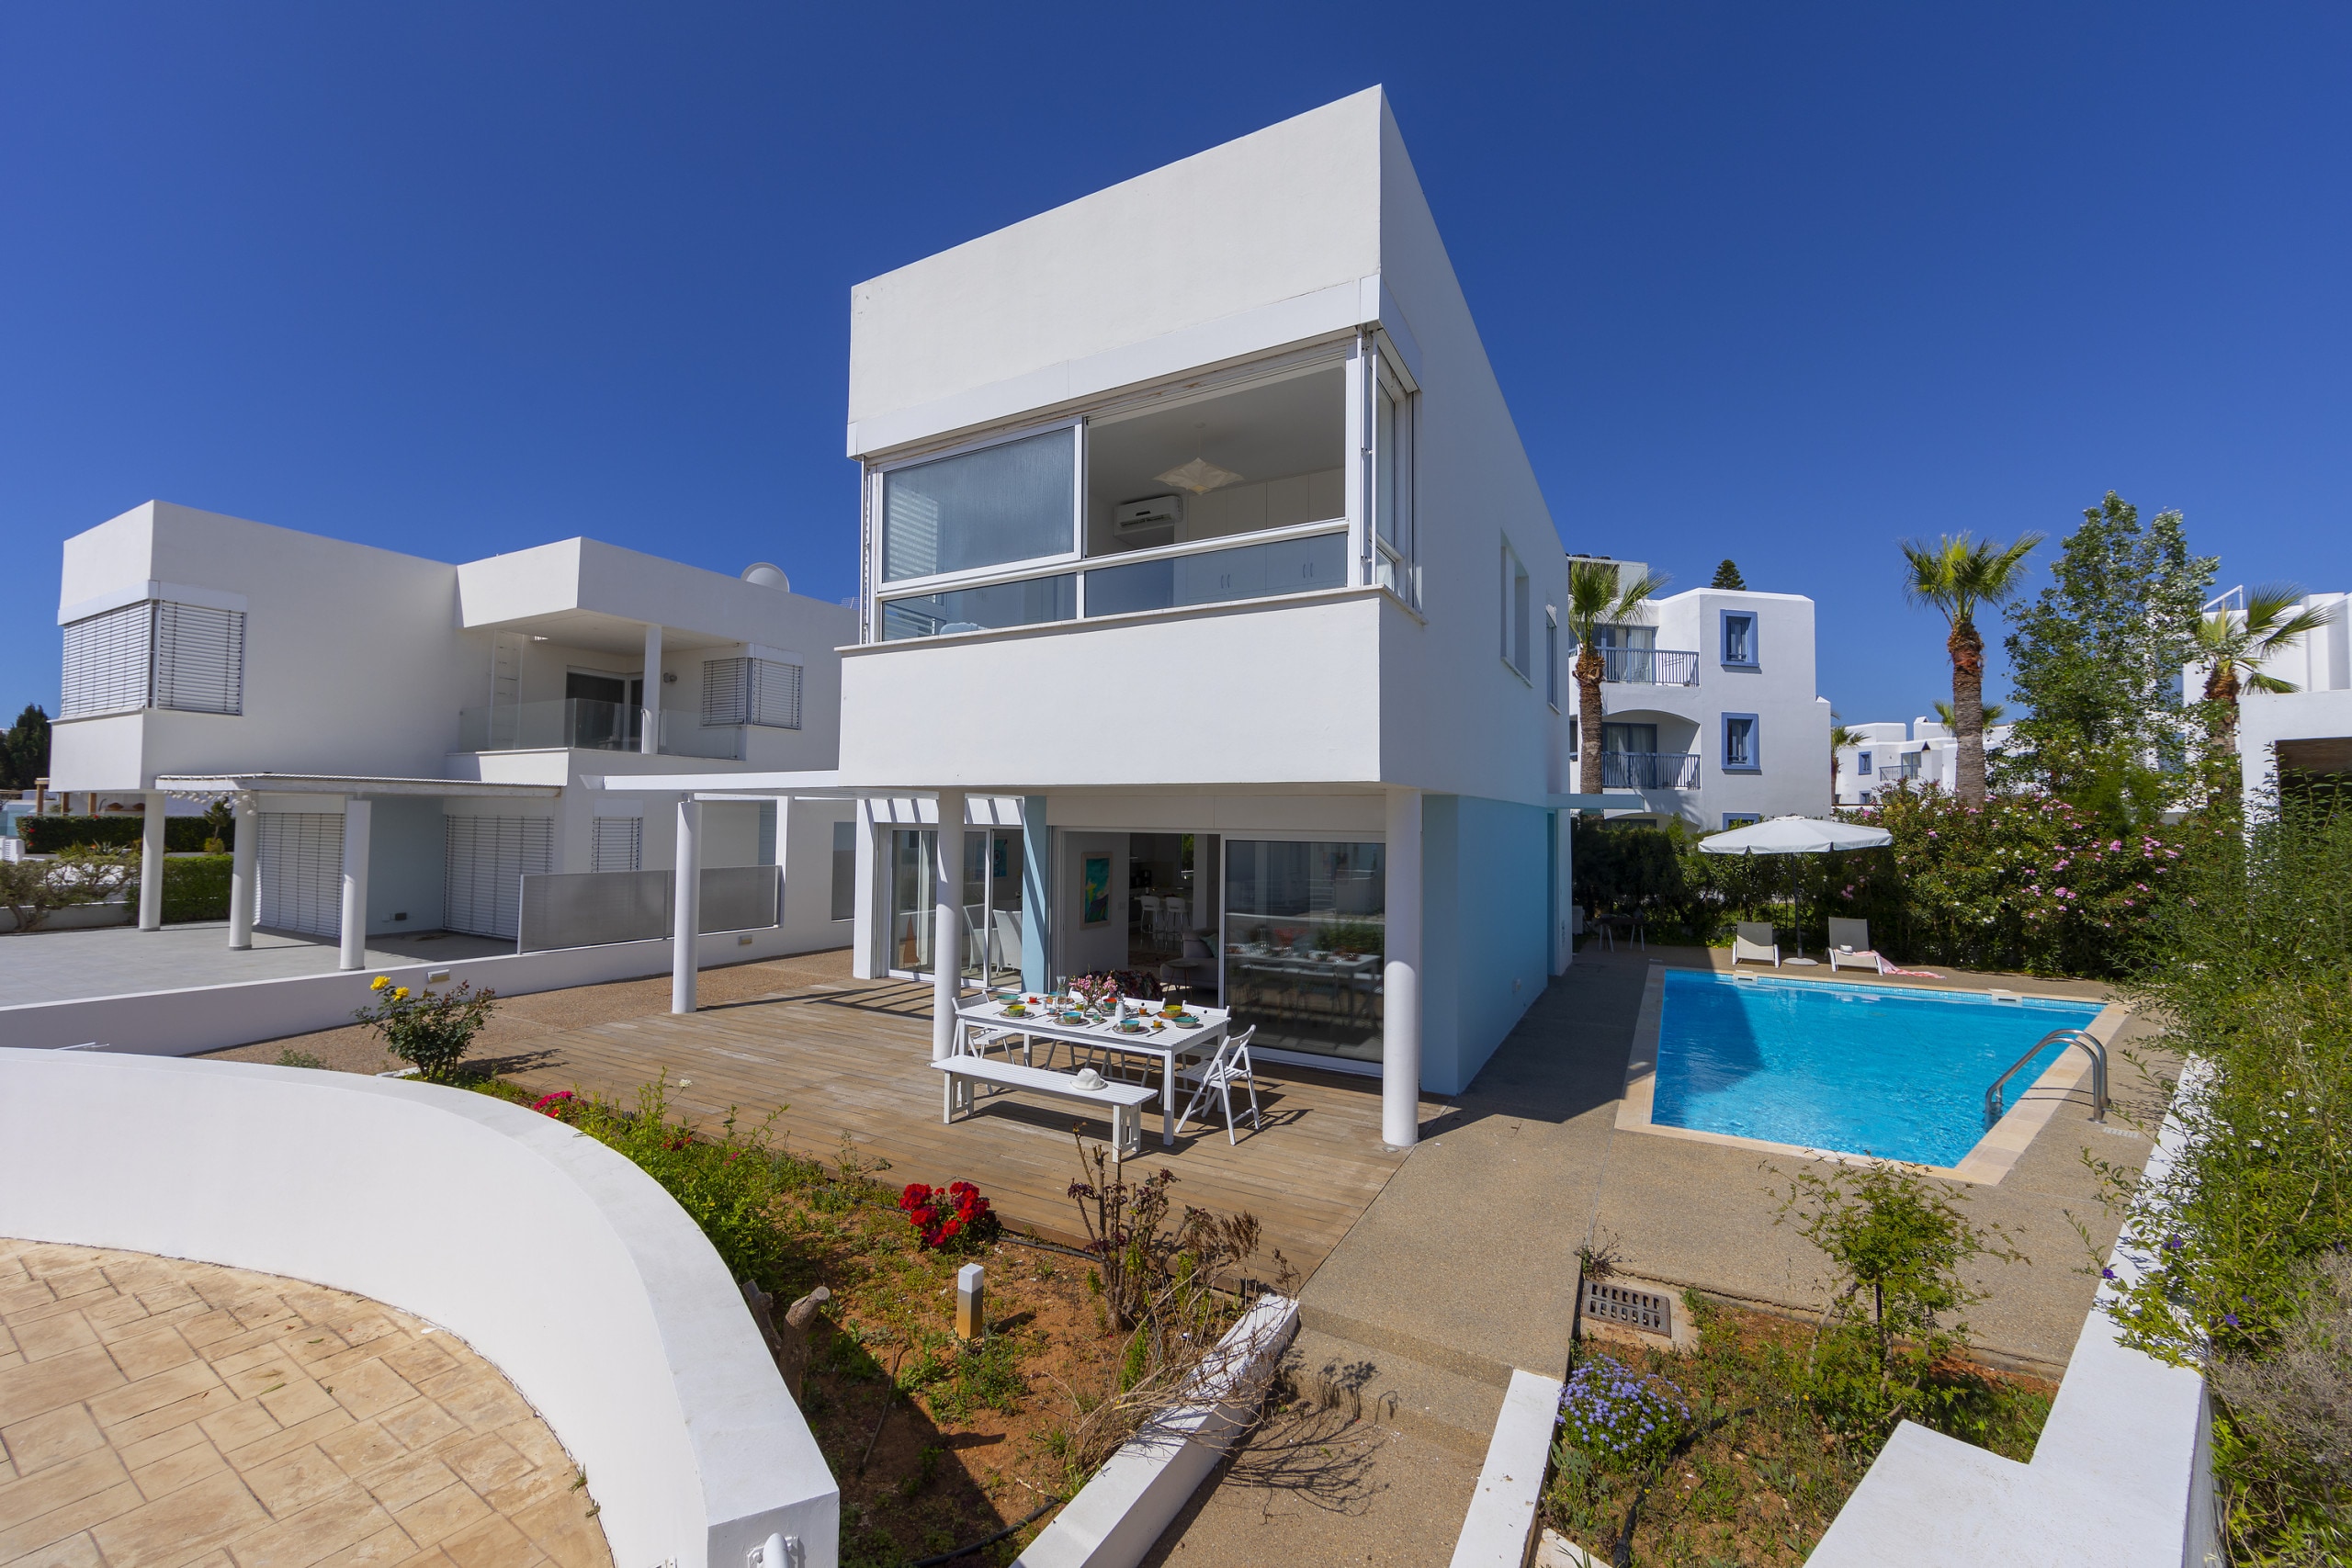 Property Image 1 - Upscale Vacation Villa with Big Pool near Fig Tree Bay